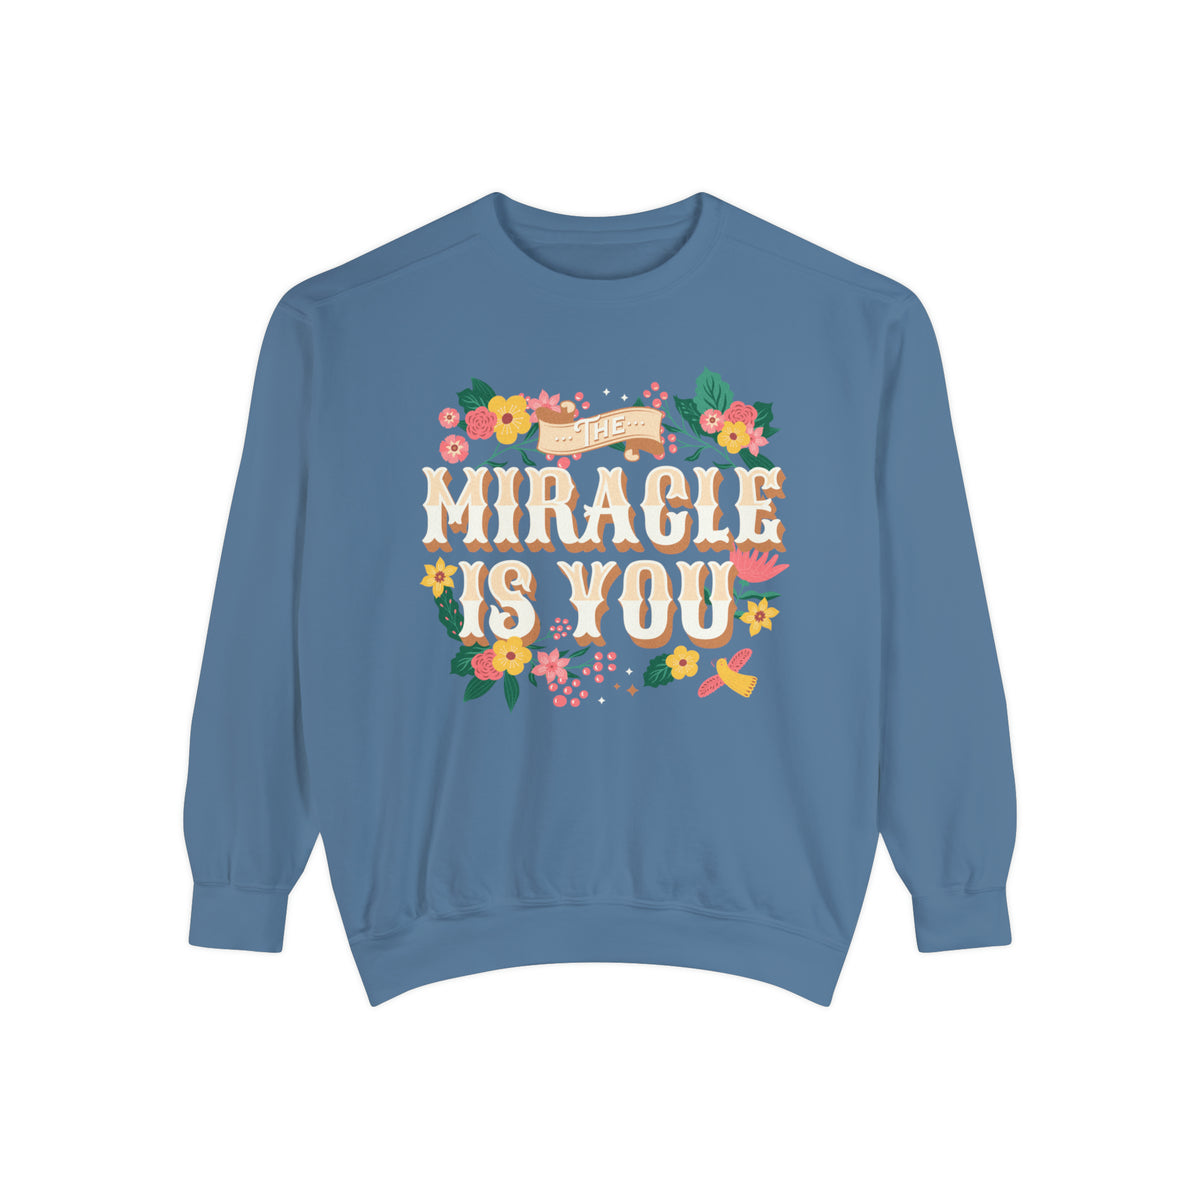 The Miracle Is You Comfort Colors Unisex Garment-Dyed Sweatshirt